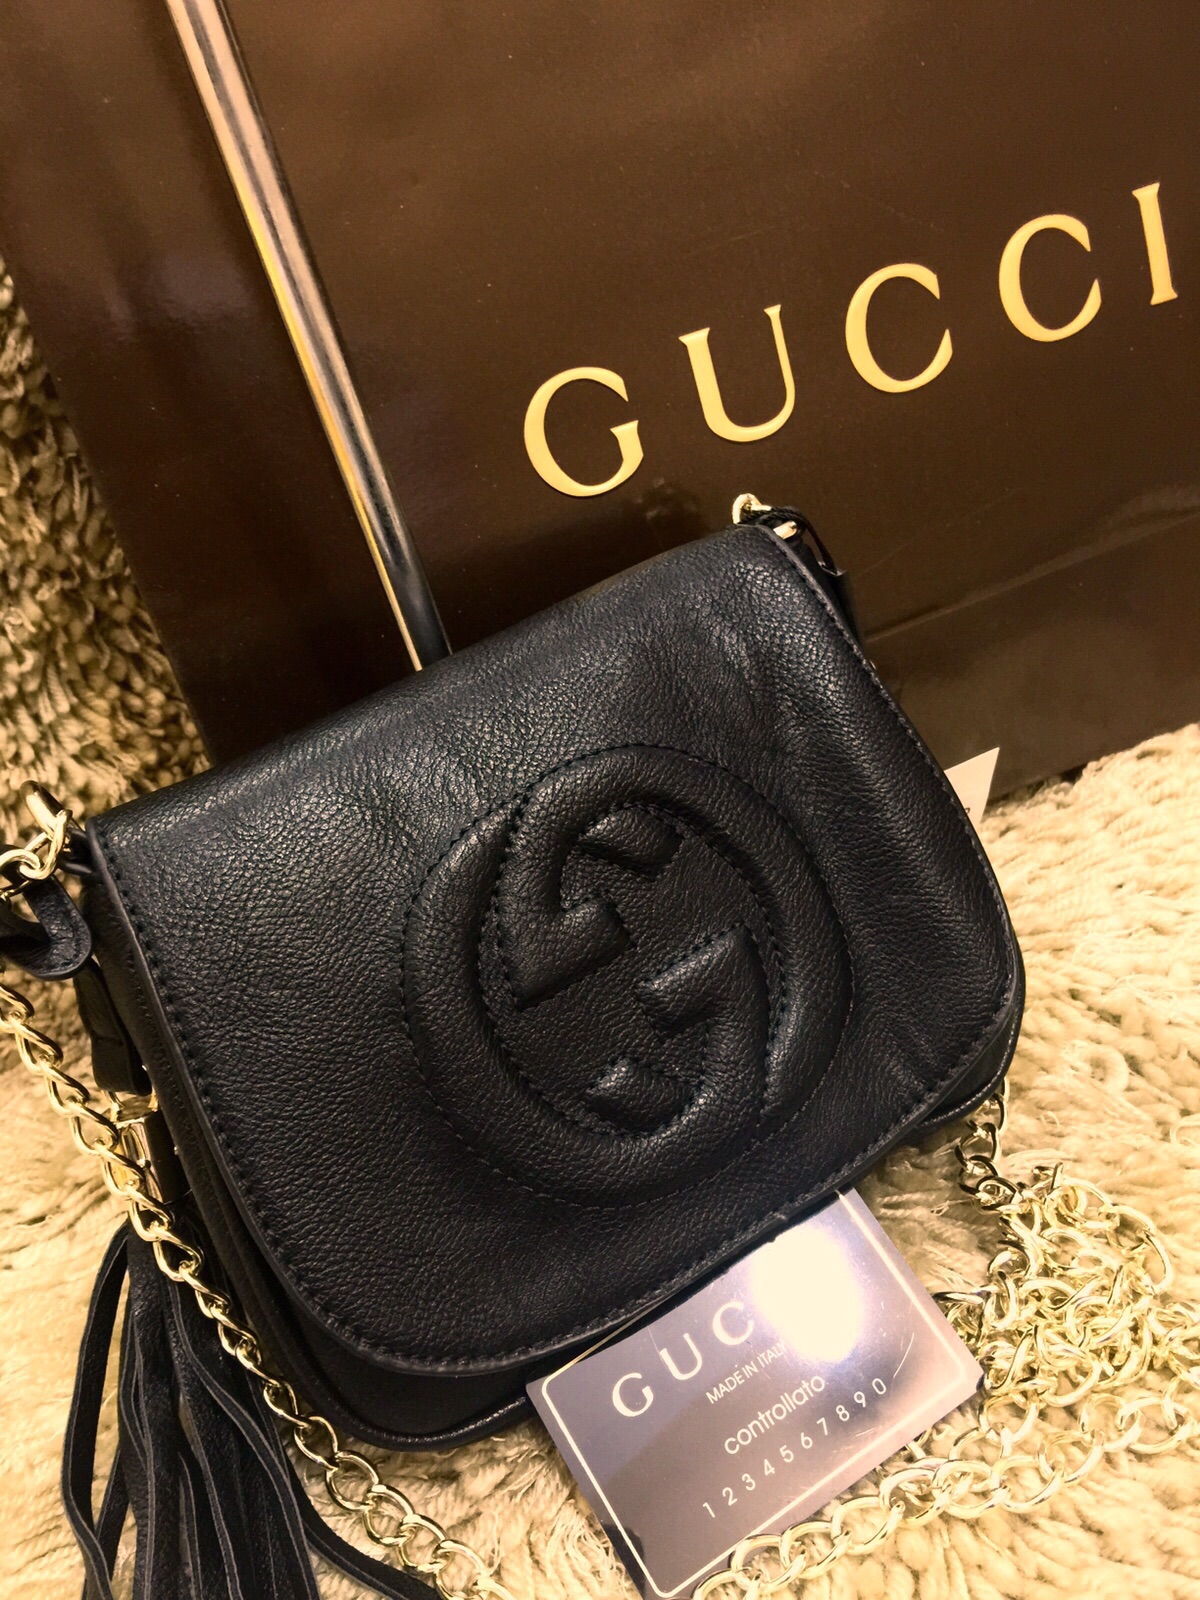 How Much Does It Cost To Make A Gucci Purse | semashow.com